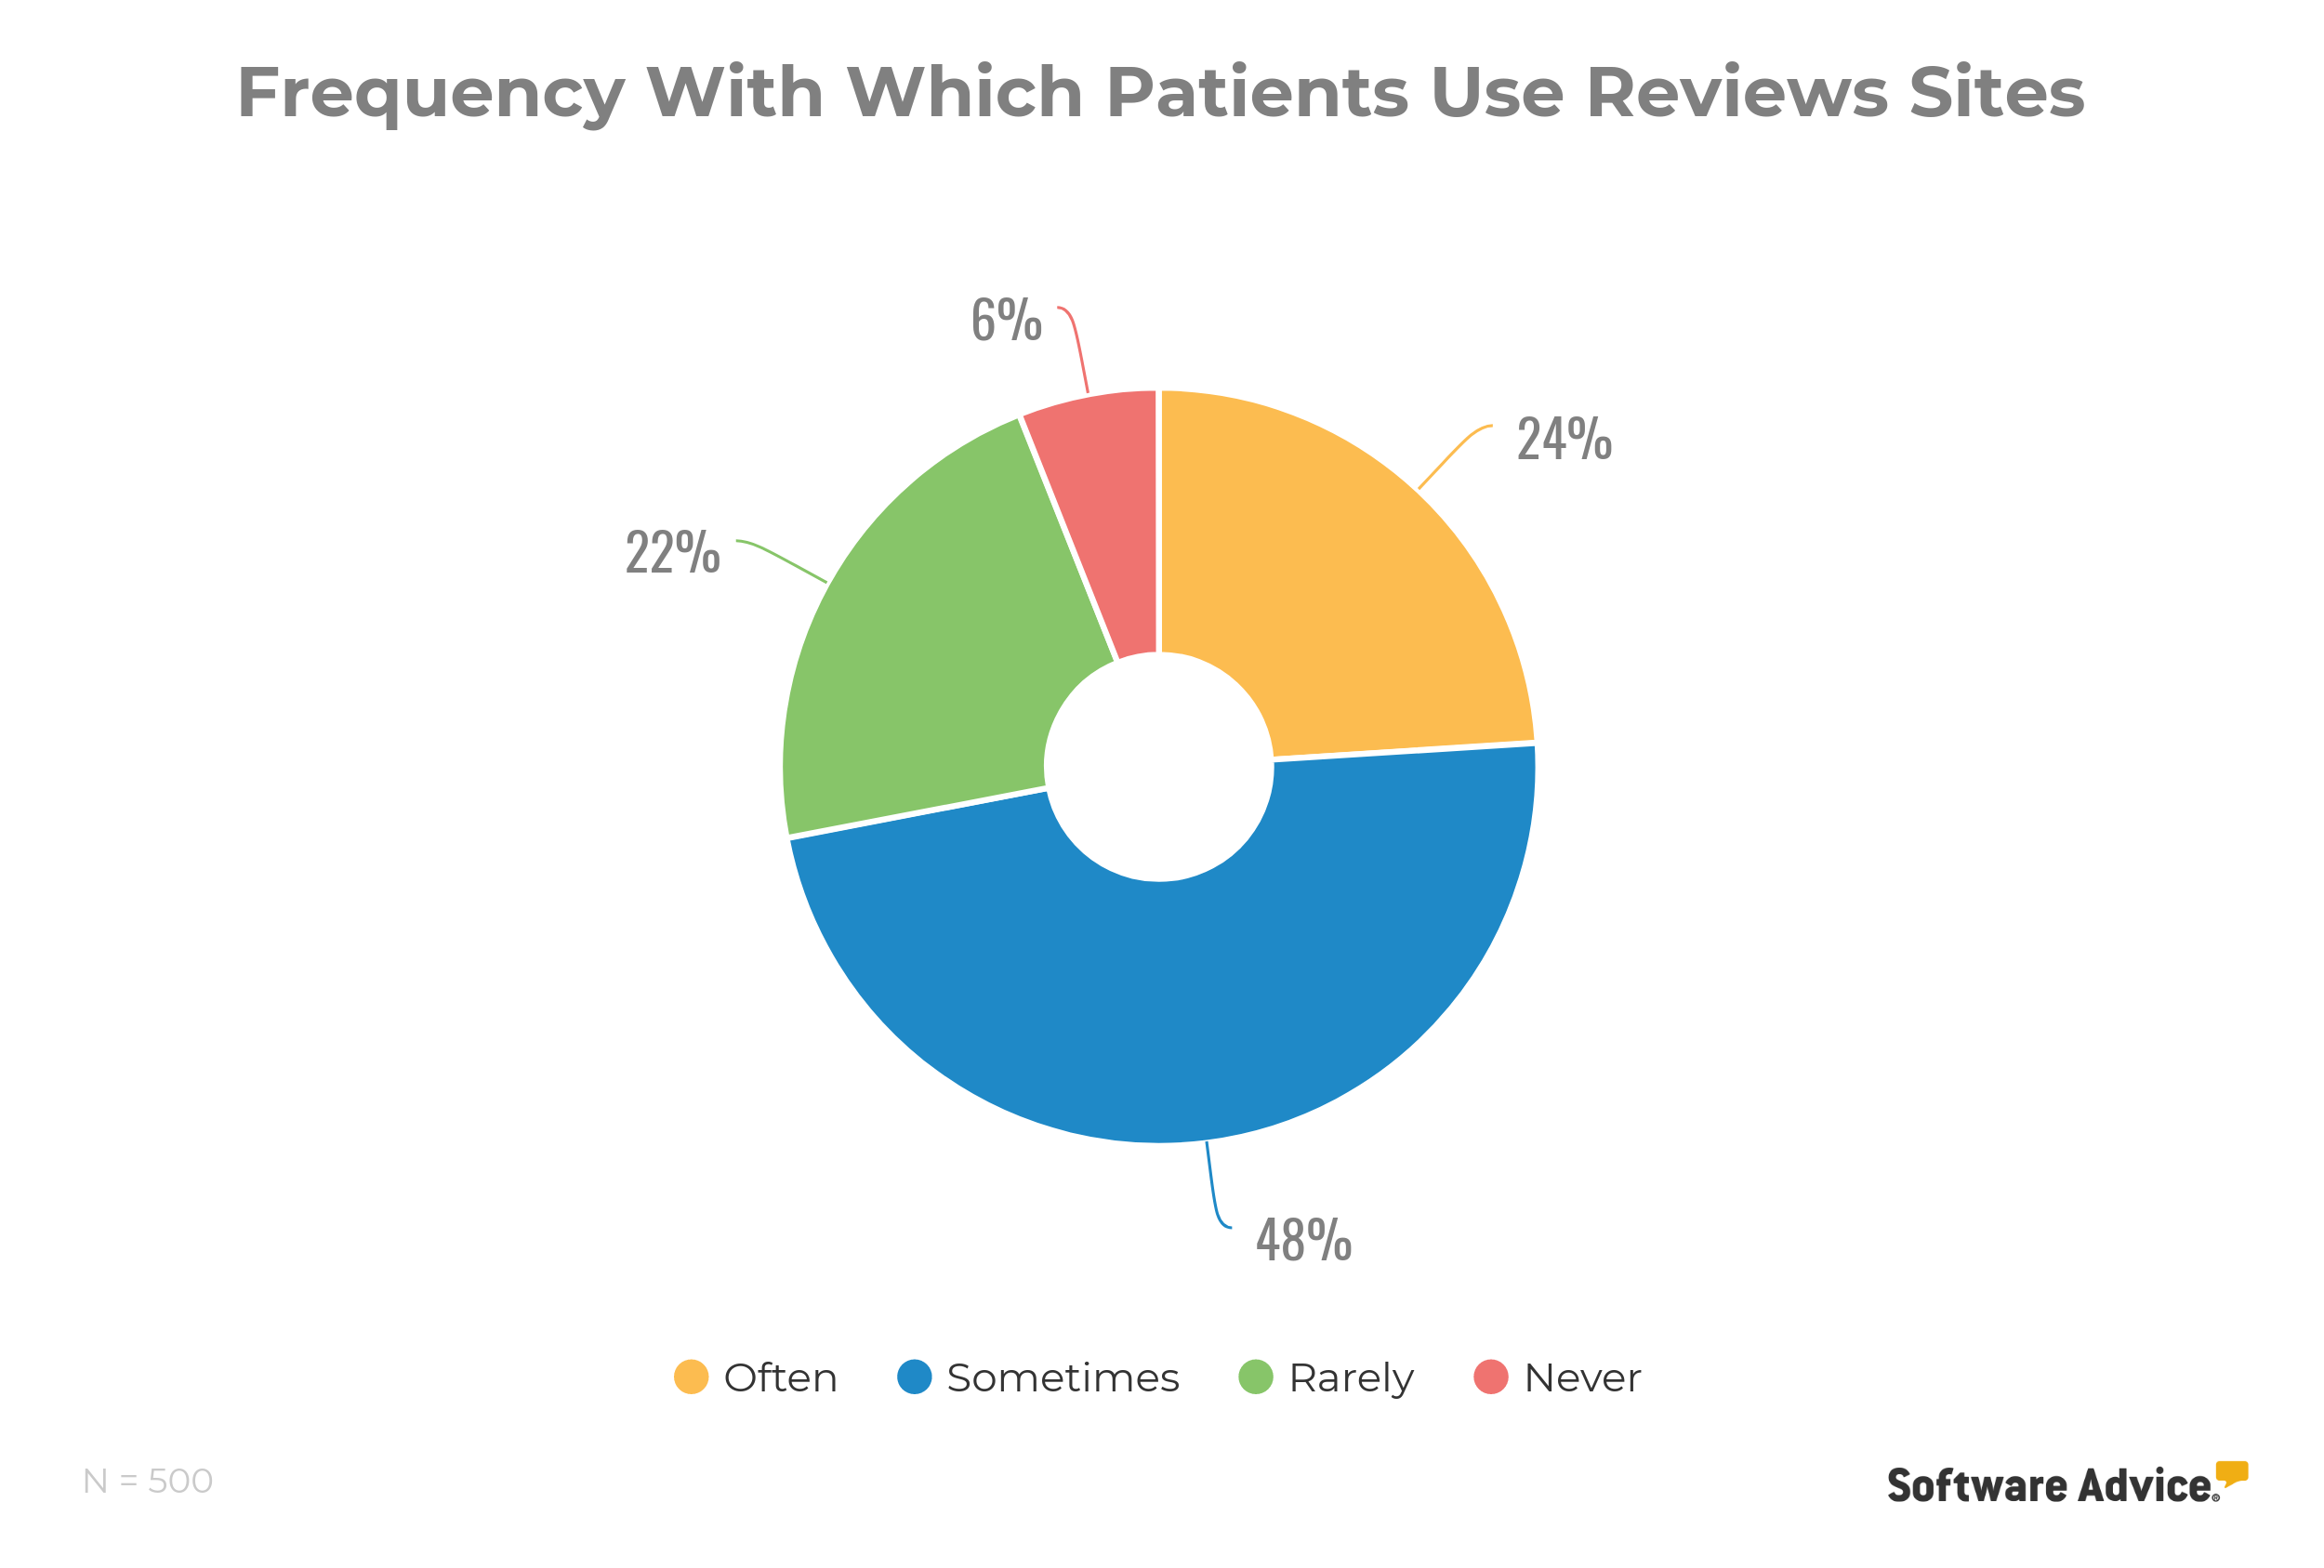 Frequency-with-which-patients-use-reviews-sites